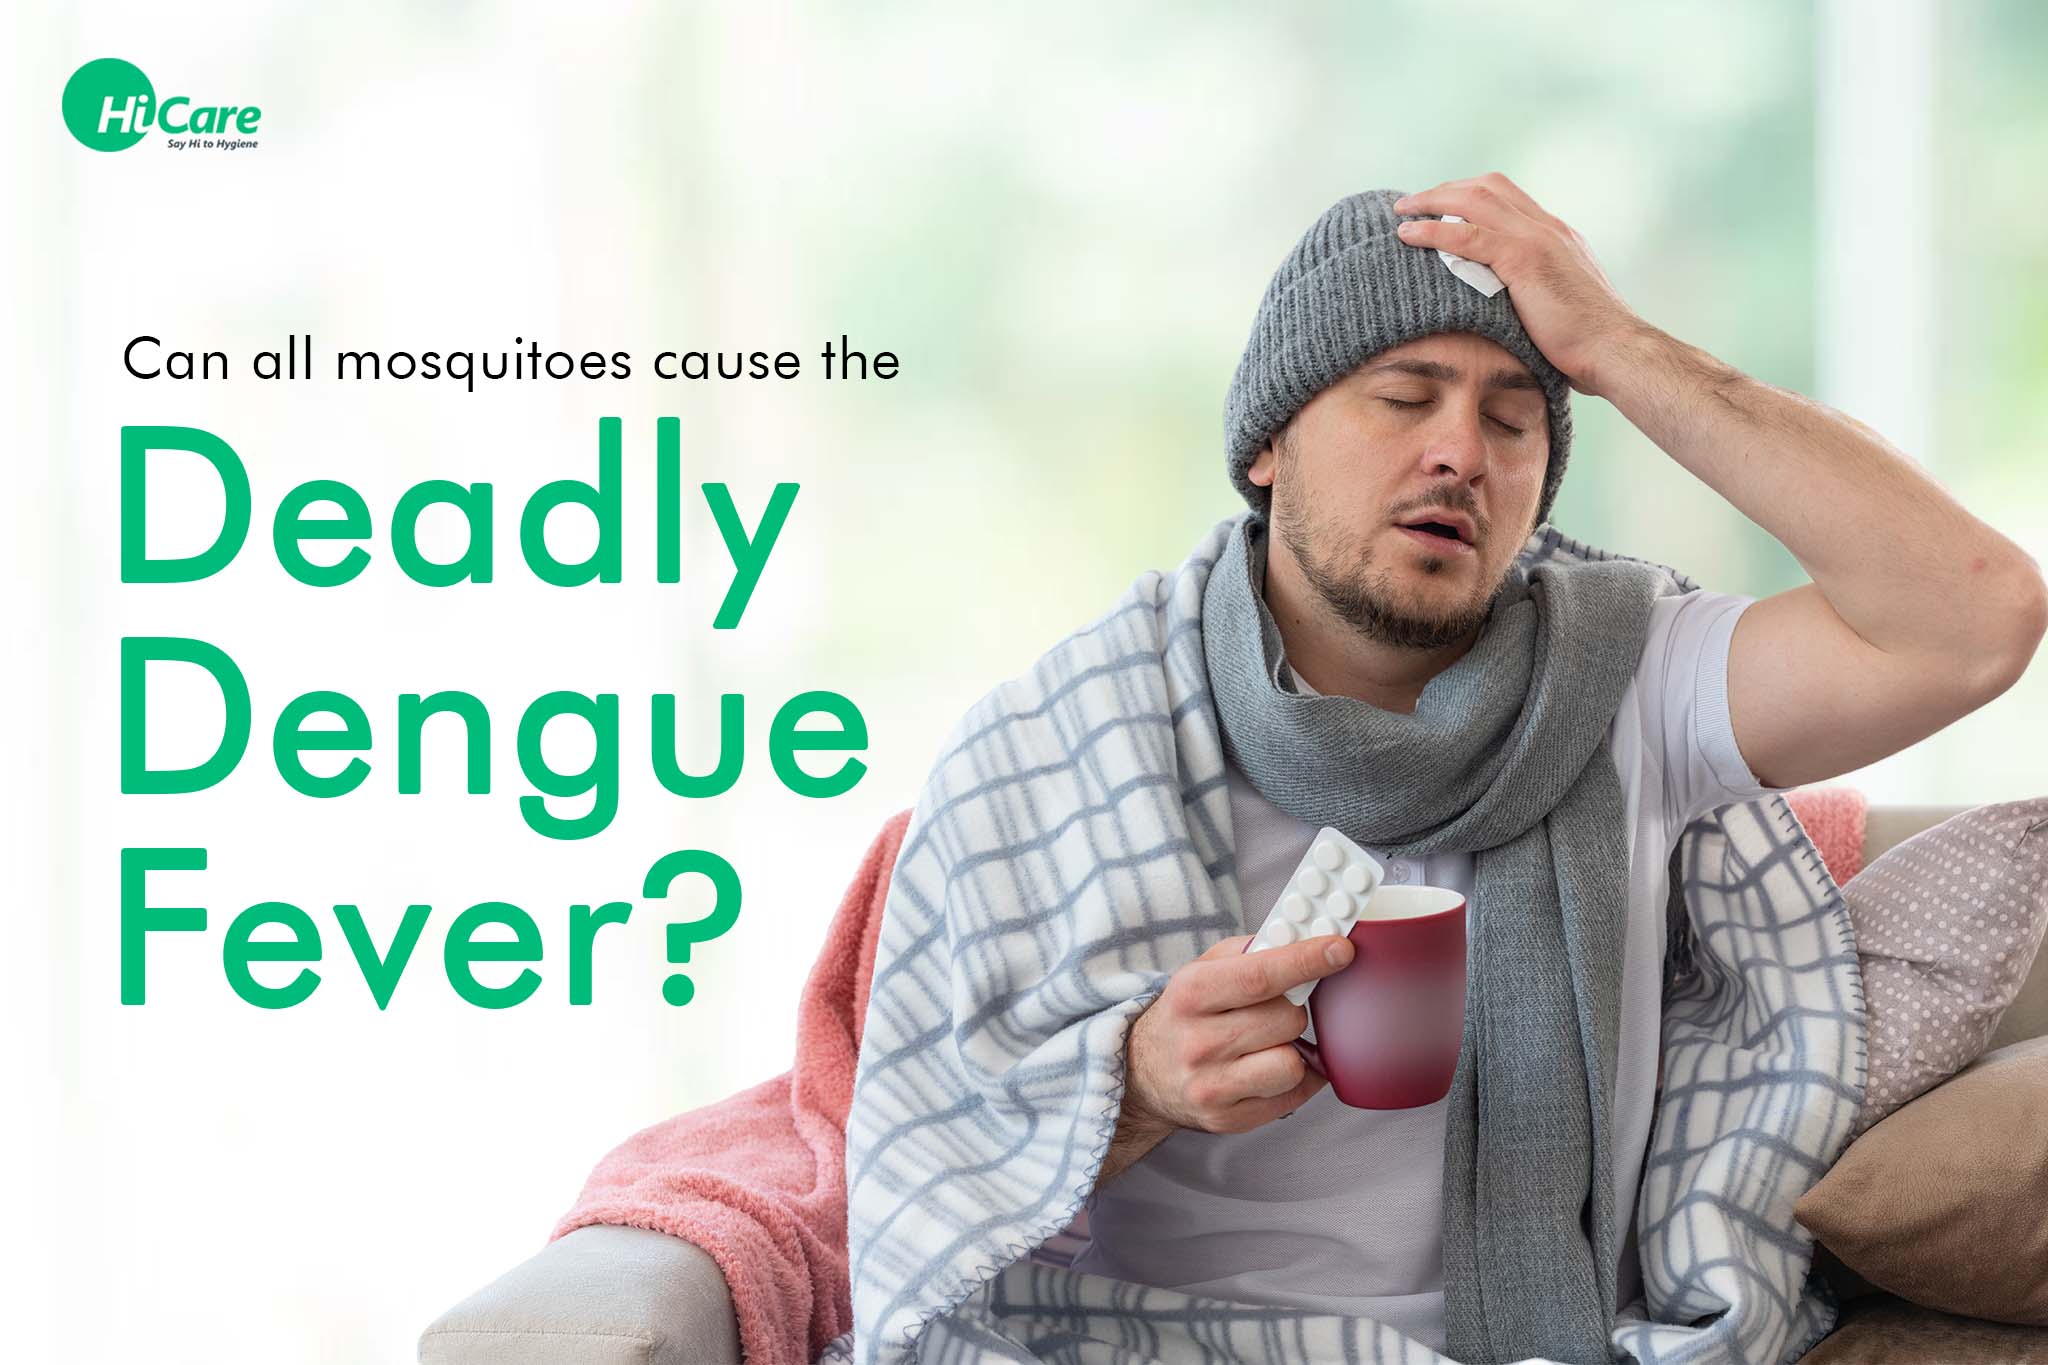 can all mosquitoes cause the deadly dengue fever